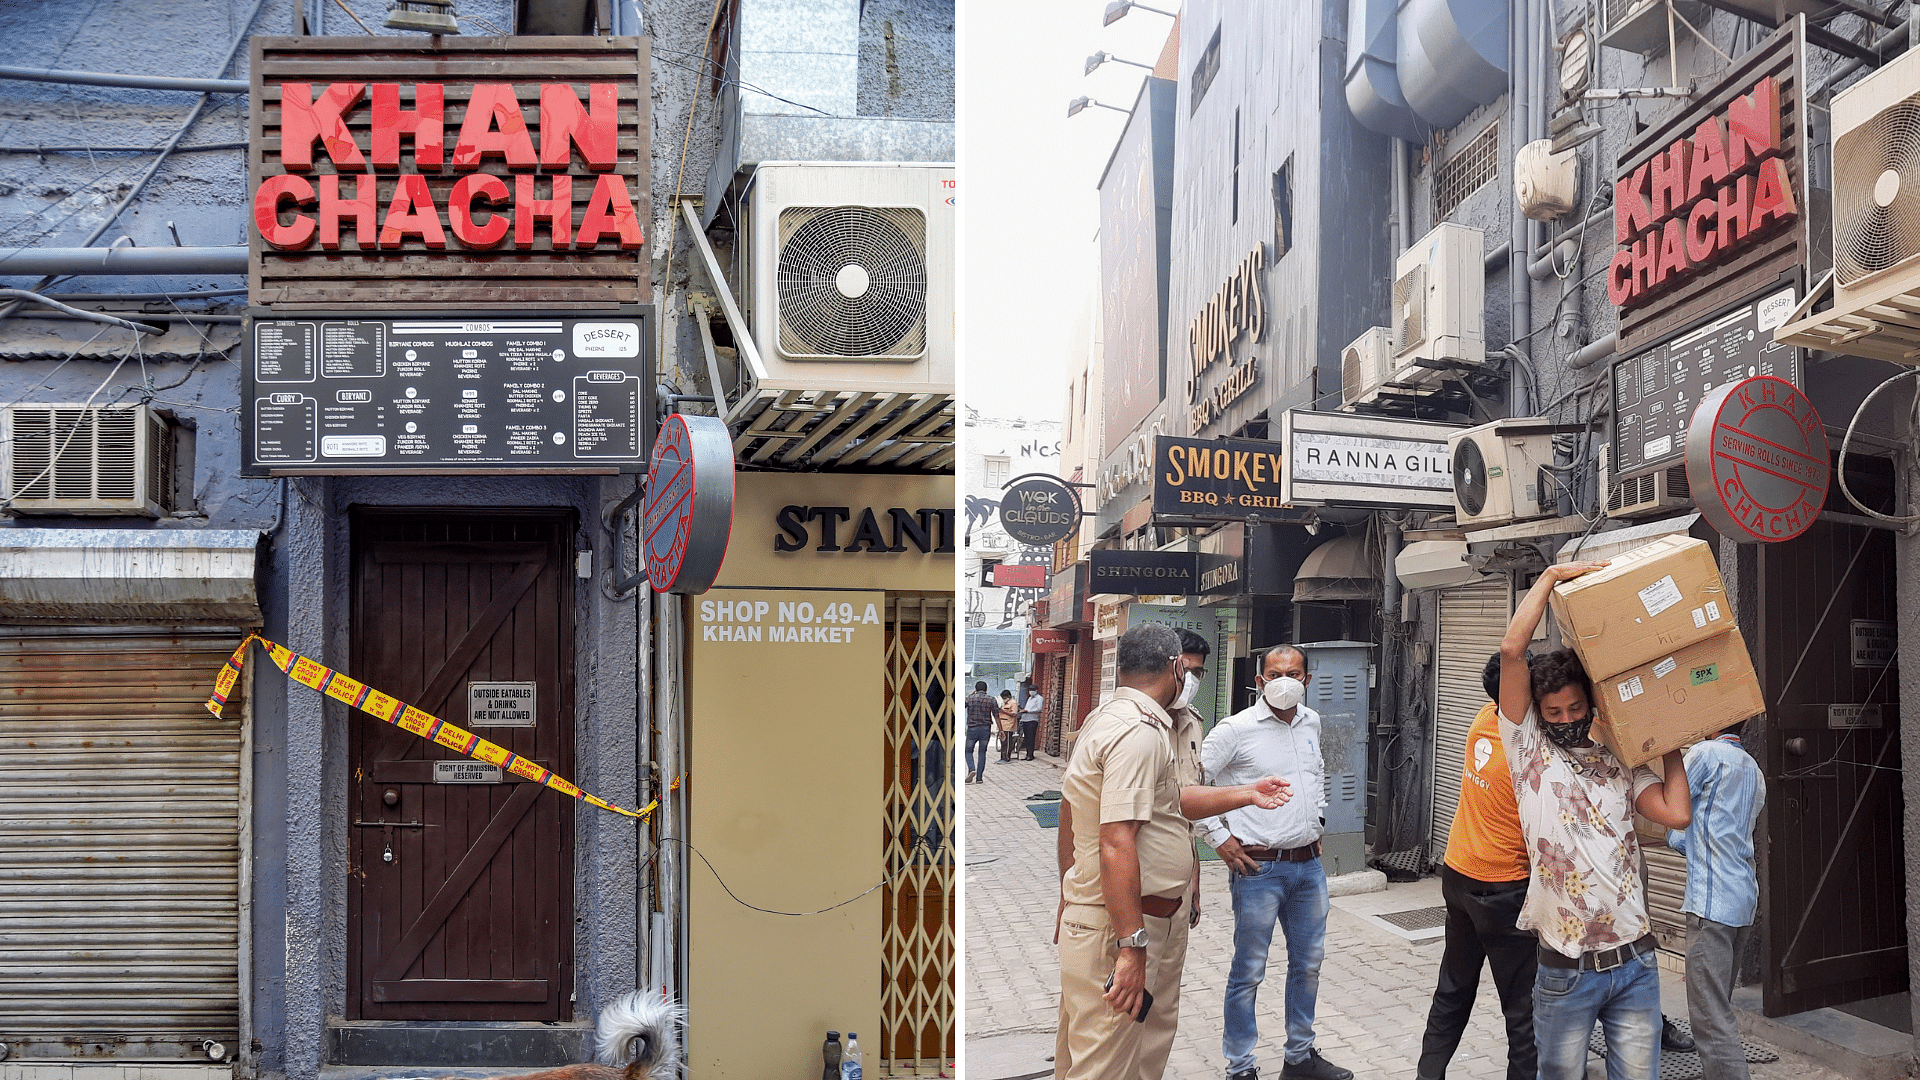 The police’s investigation revealed that the accused were hiding concentrators in two more restaurants in Khan Market.